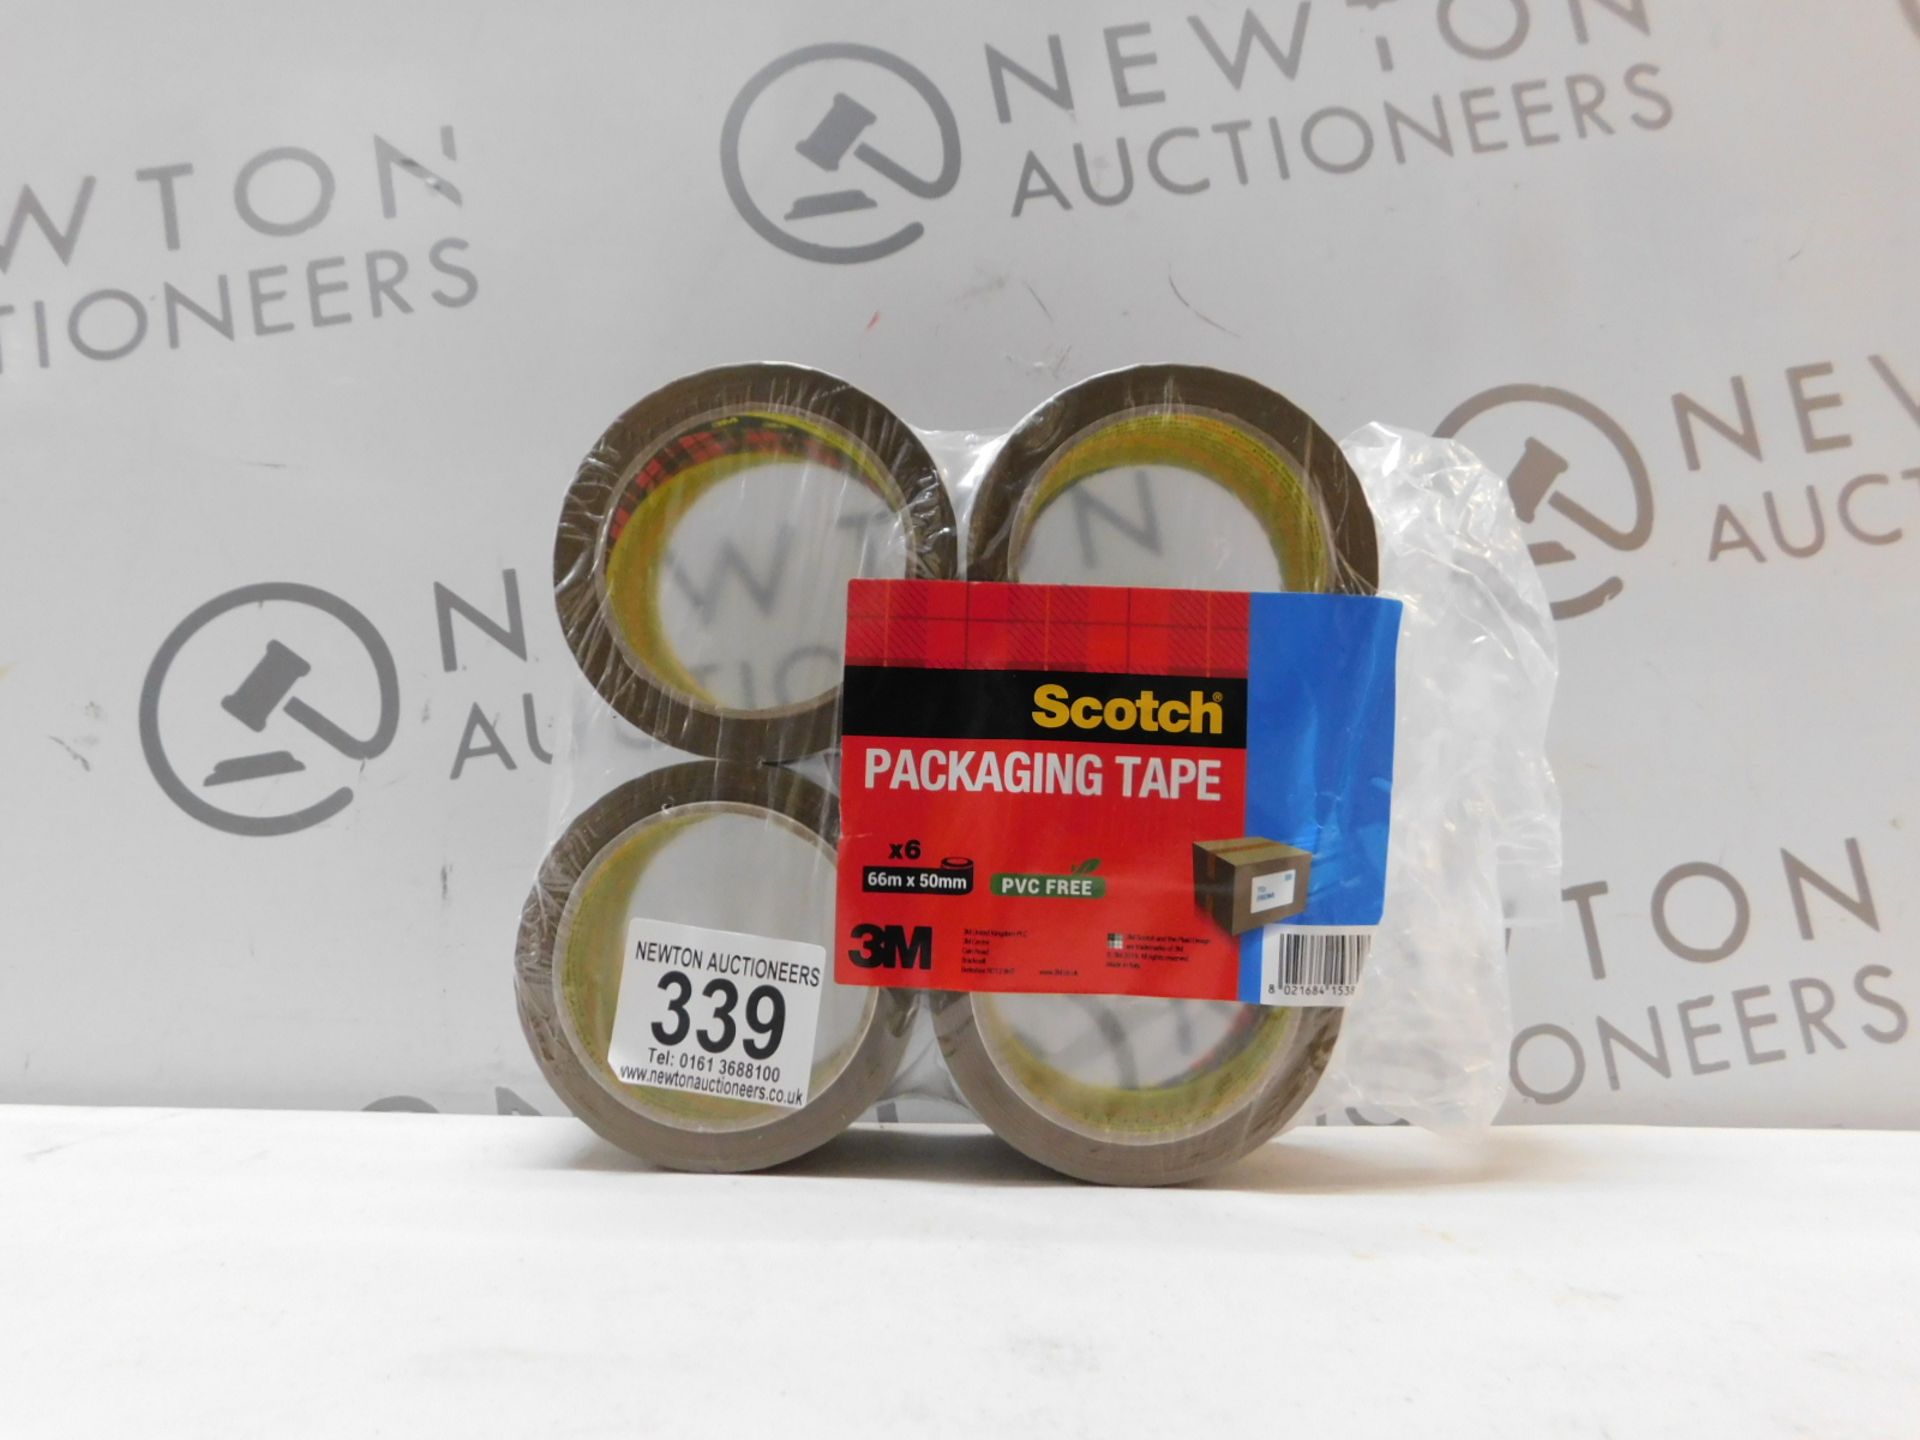 1 PACK OF 4 SCOTCH PACKAGING TAPE RRP Â£9